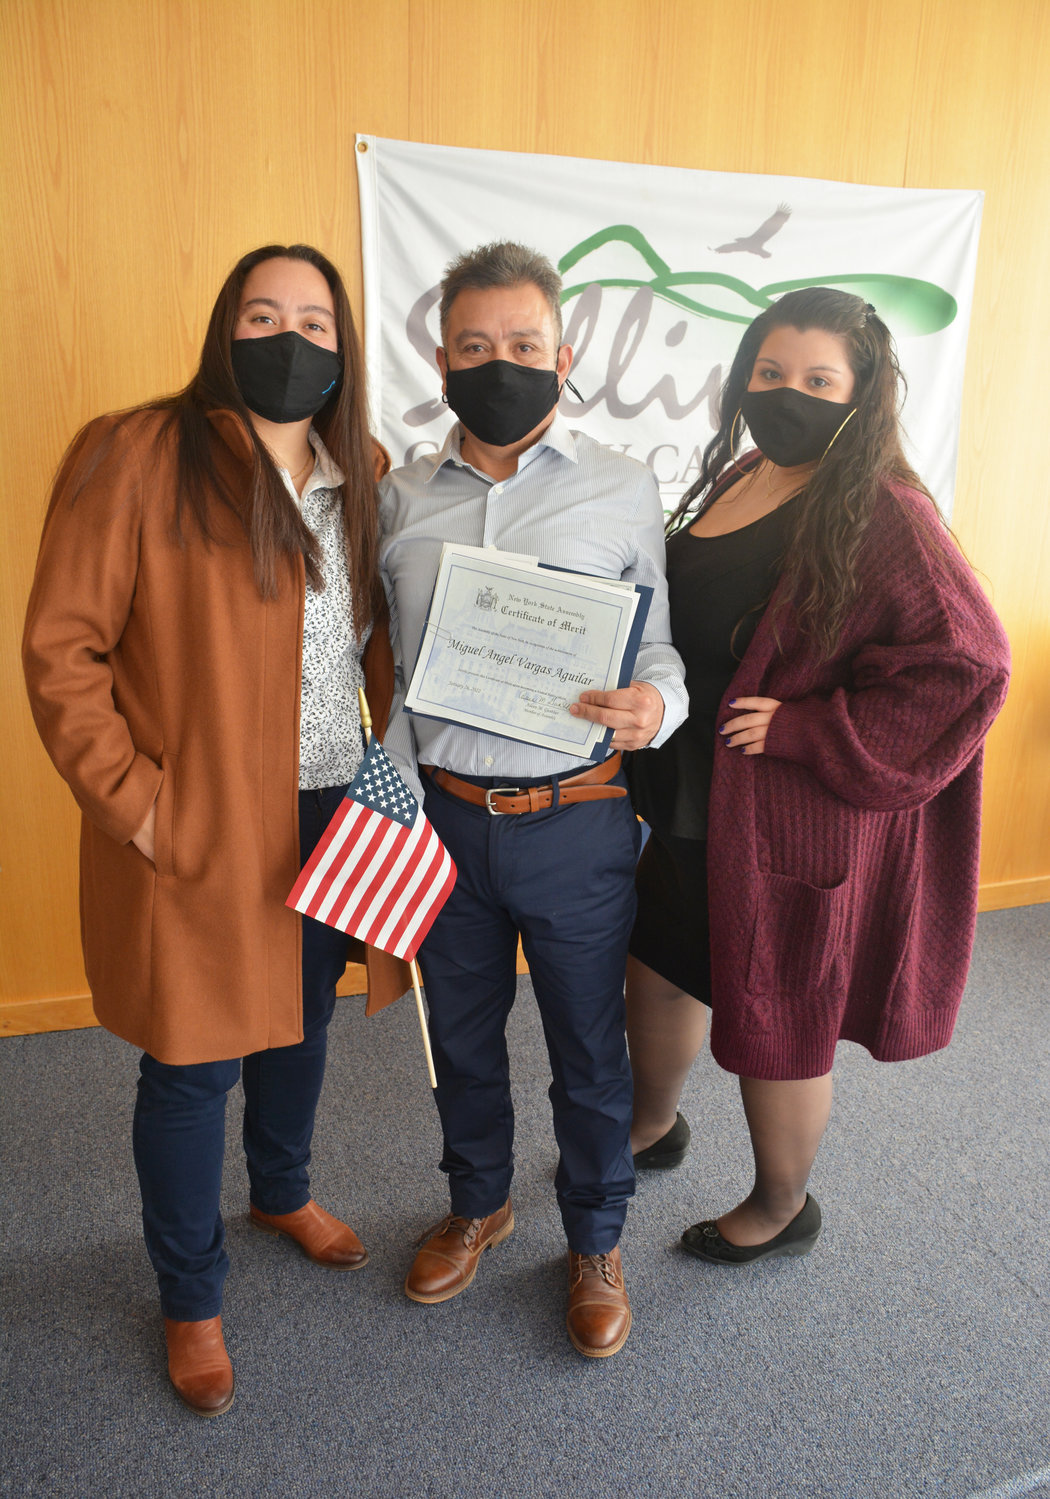 Miguel Angel Vargas Aguilar shows off his certificate with his two daughters Selena (at left) and Liliana, by his side.